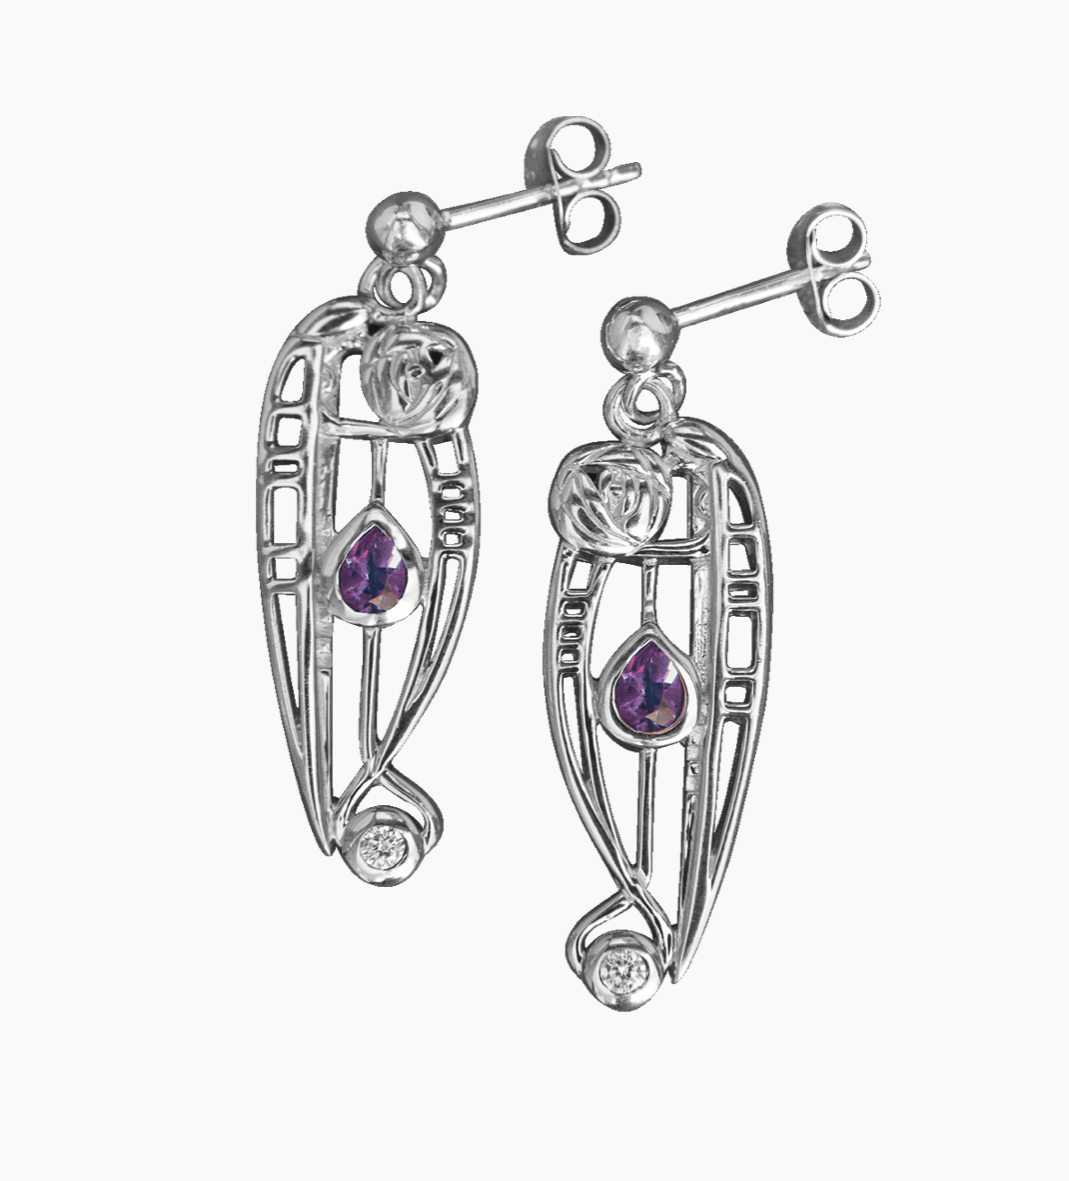 Sterling Silver And Gemstone Mackintosh Earrings - 321